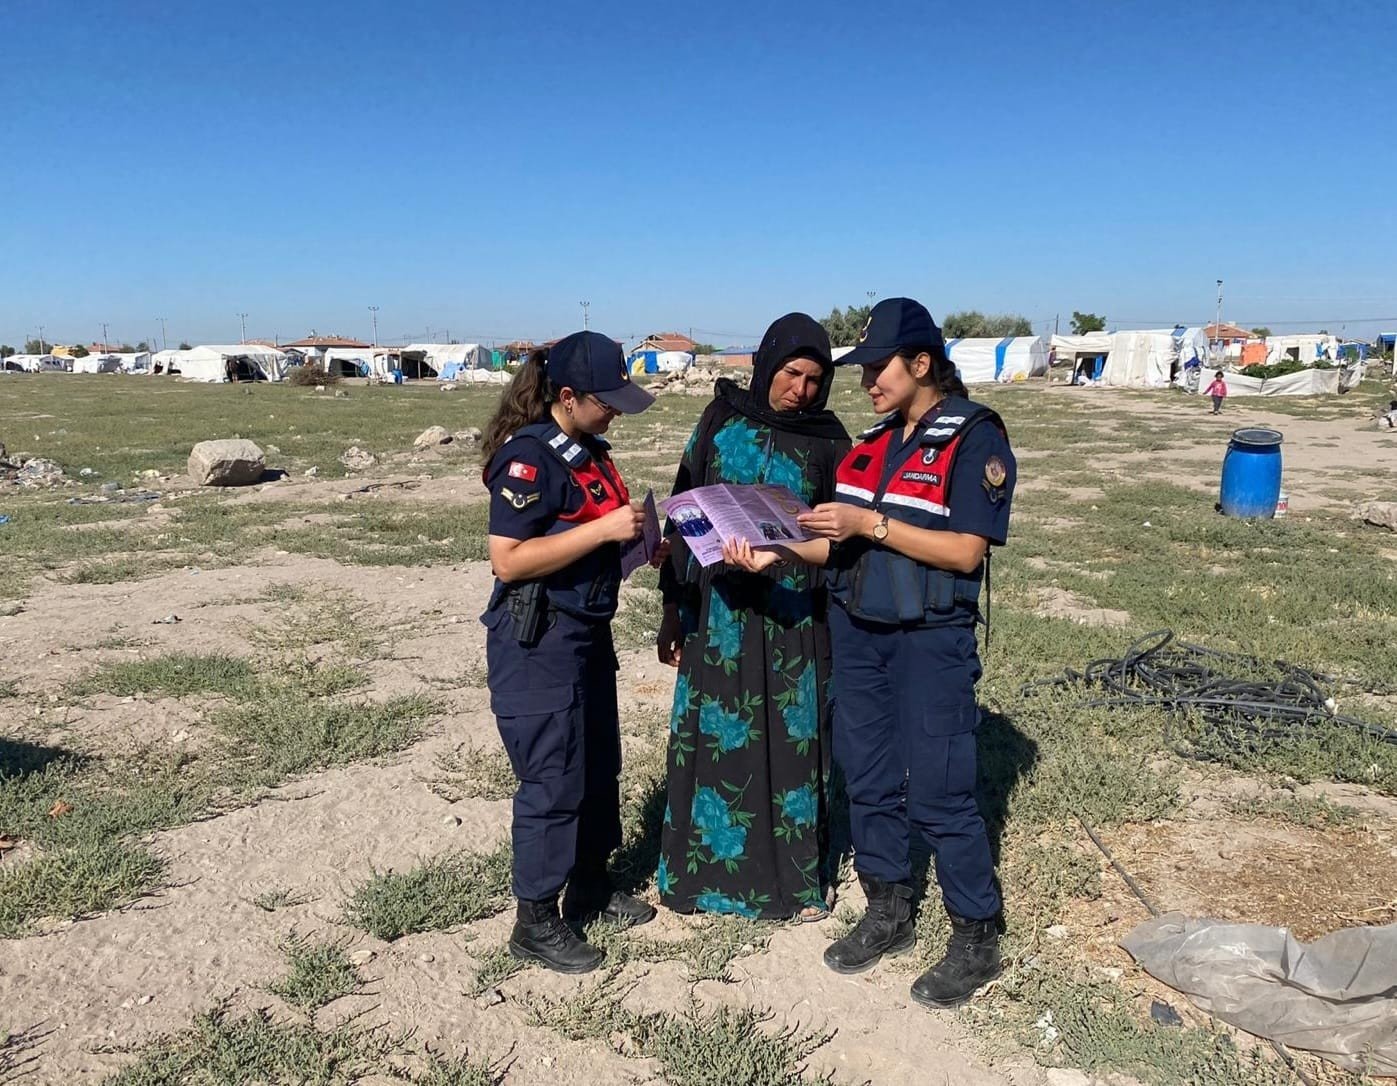 Gendarmerie officers inform a seasonal worker about assistance they can receive against violence, in Aksaray, central Turkey, Aug. 1, 2022. (İHA PHOTO) 